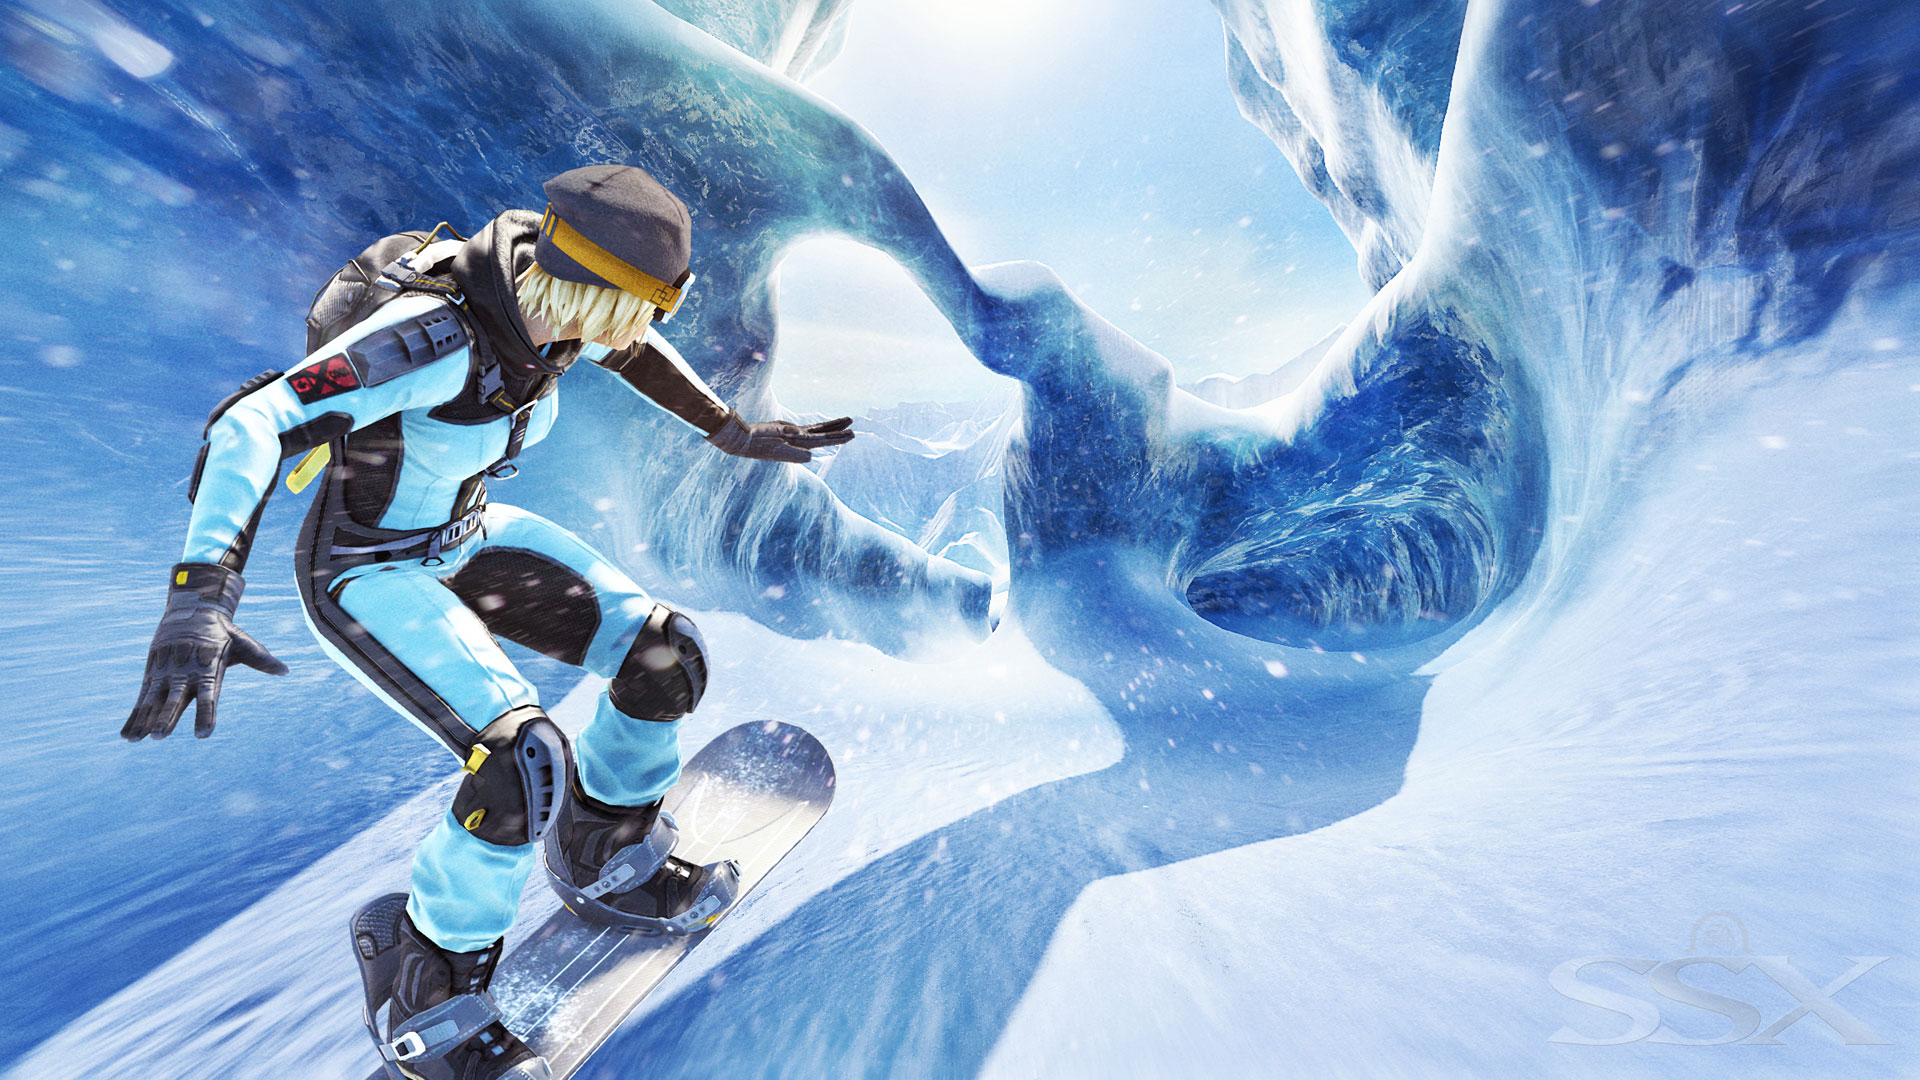 Popular Ssx 3 Image for Phone